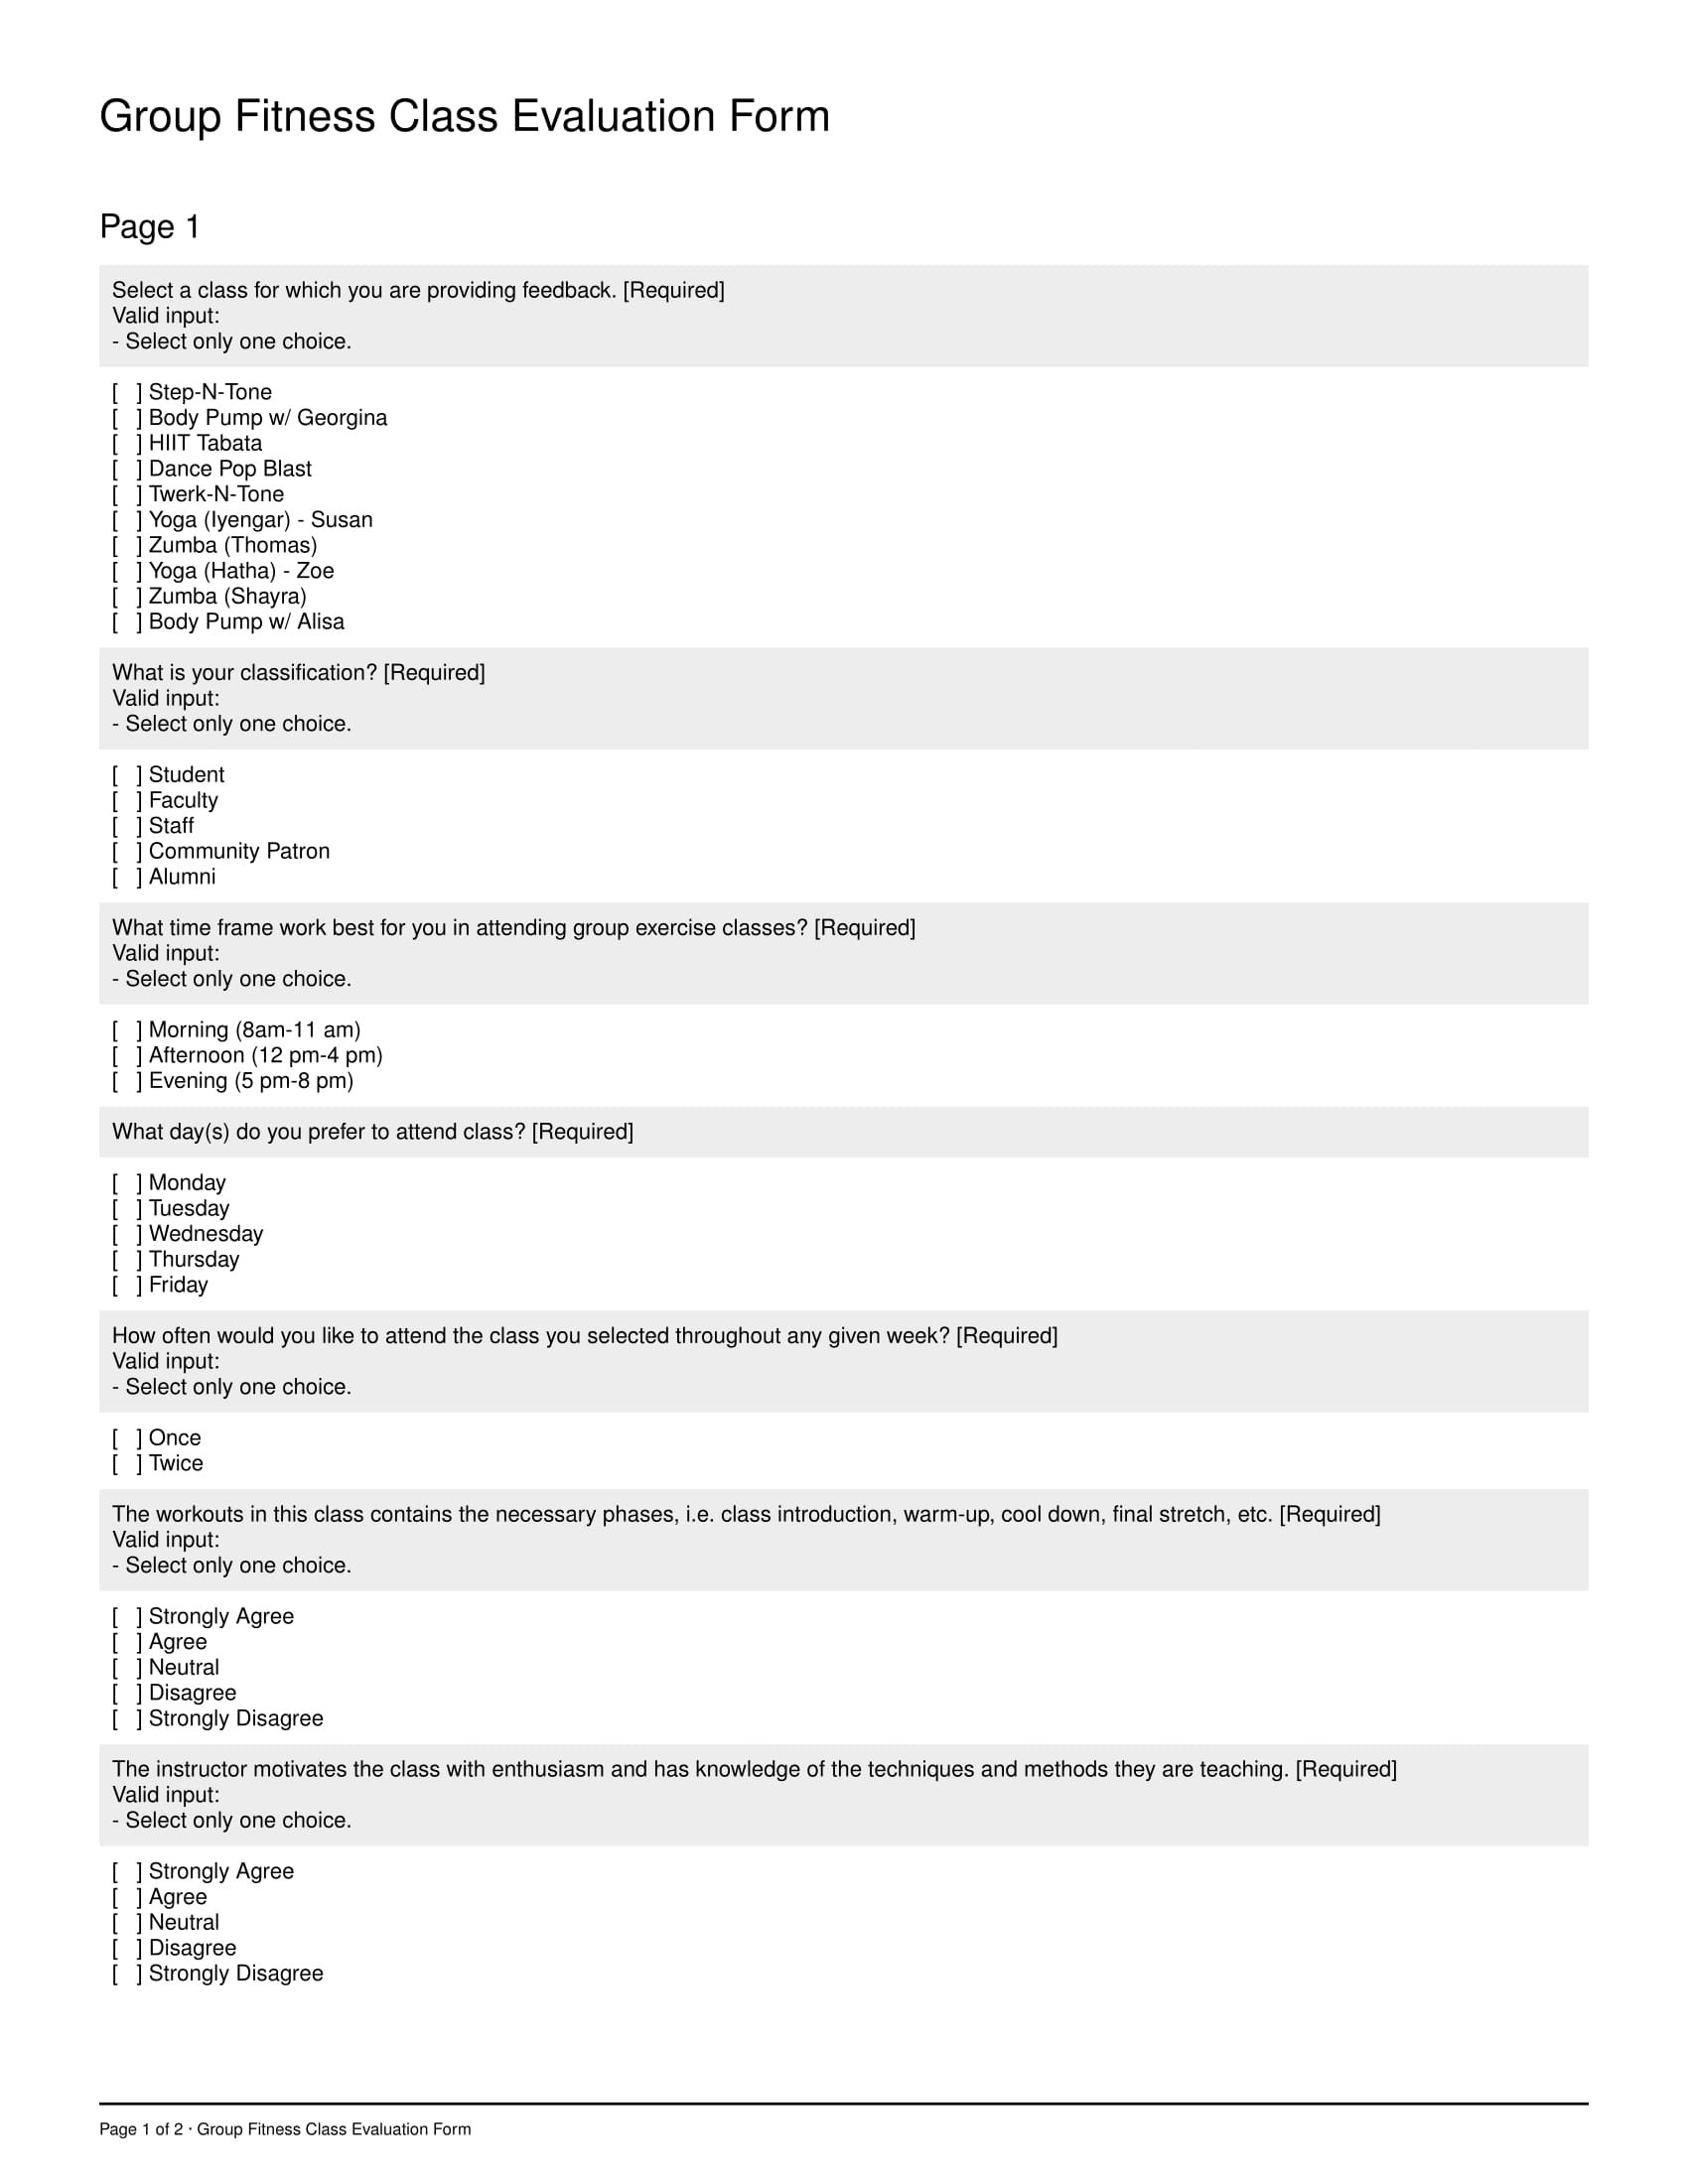 group fitness evaluation form example 1